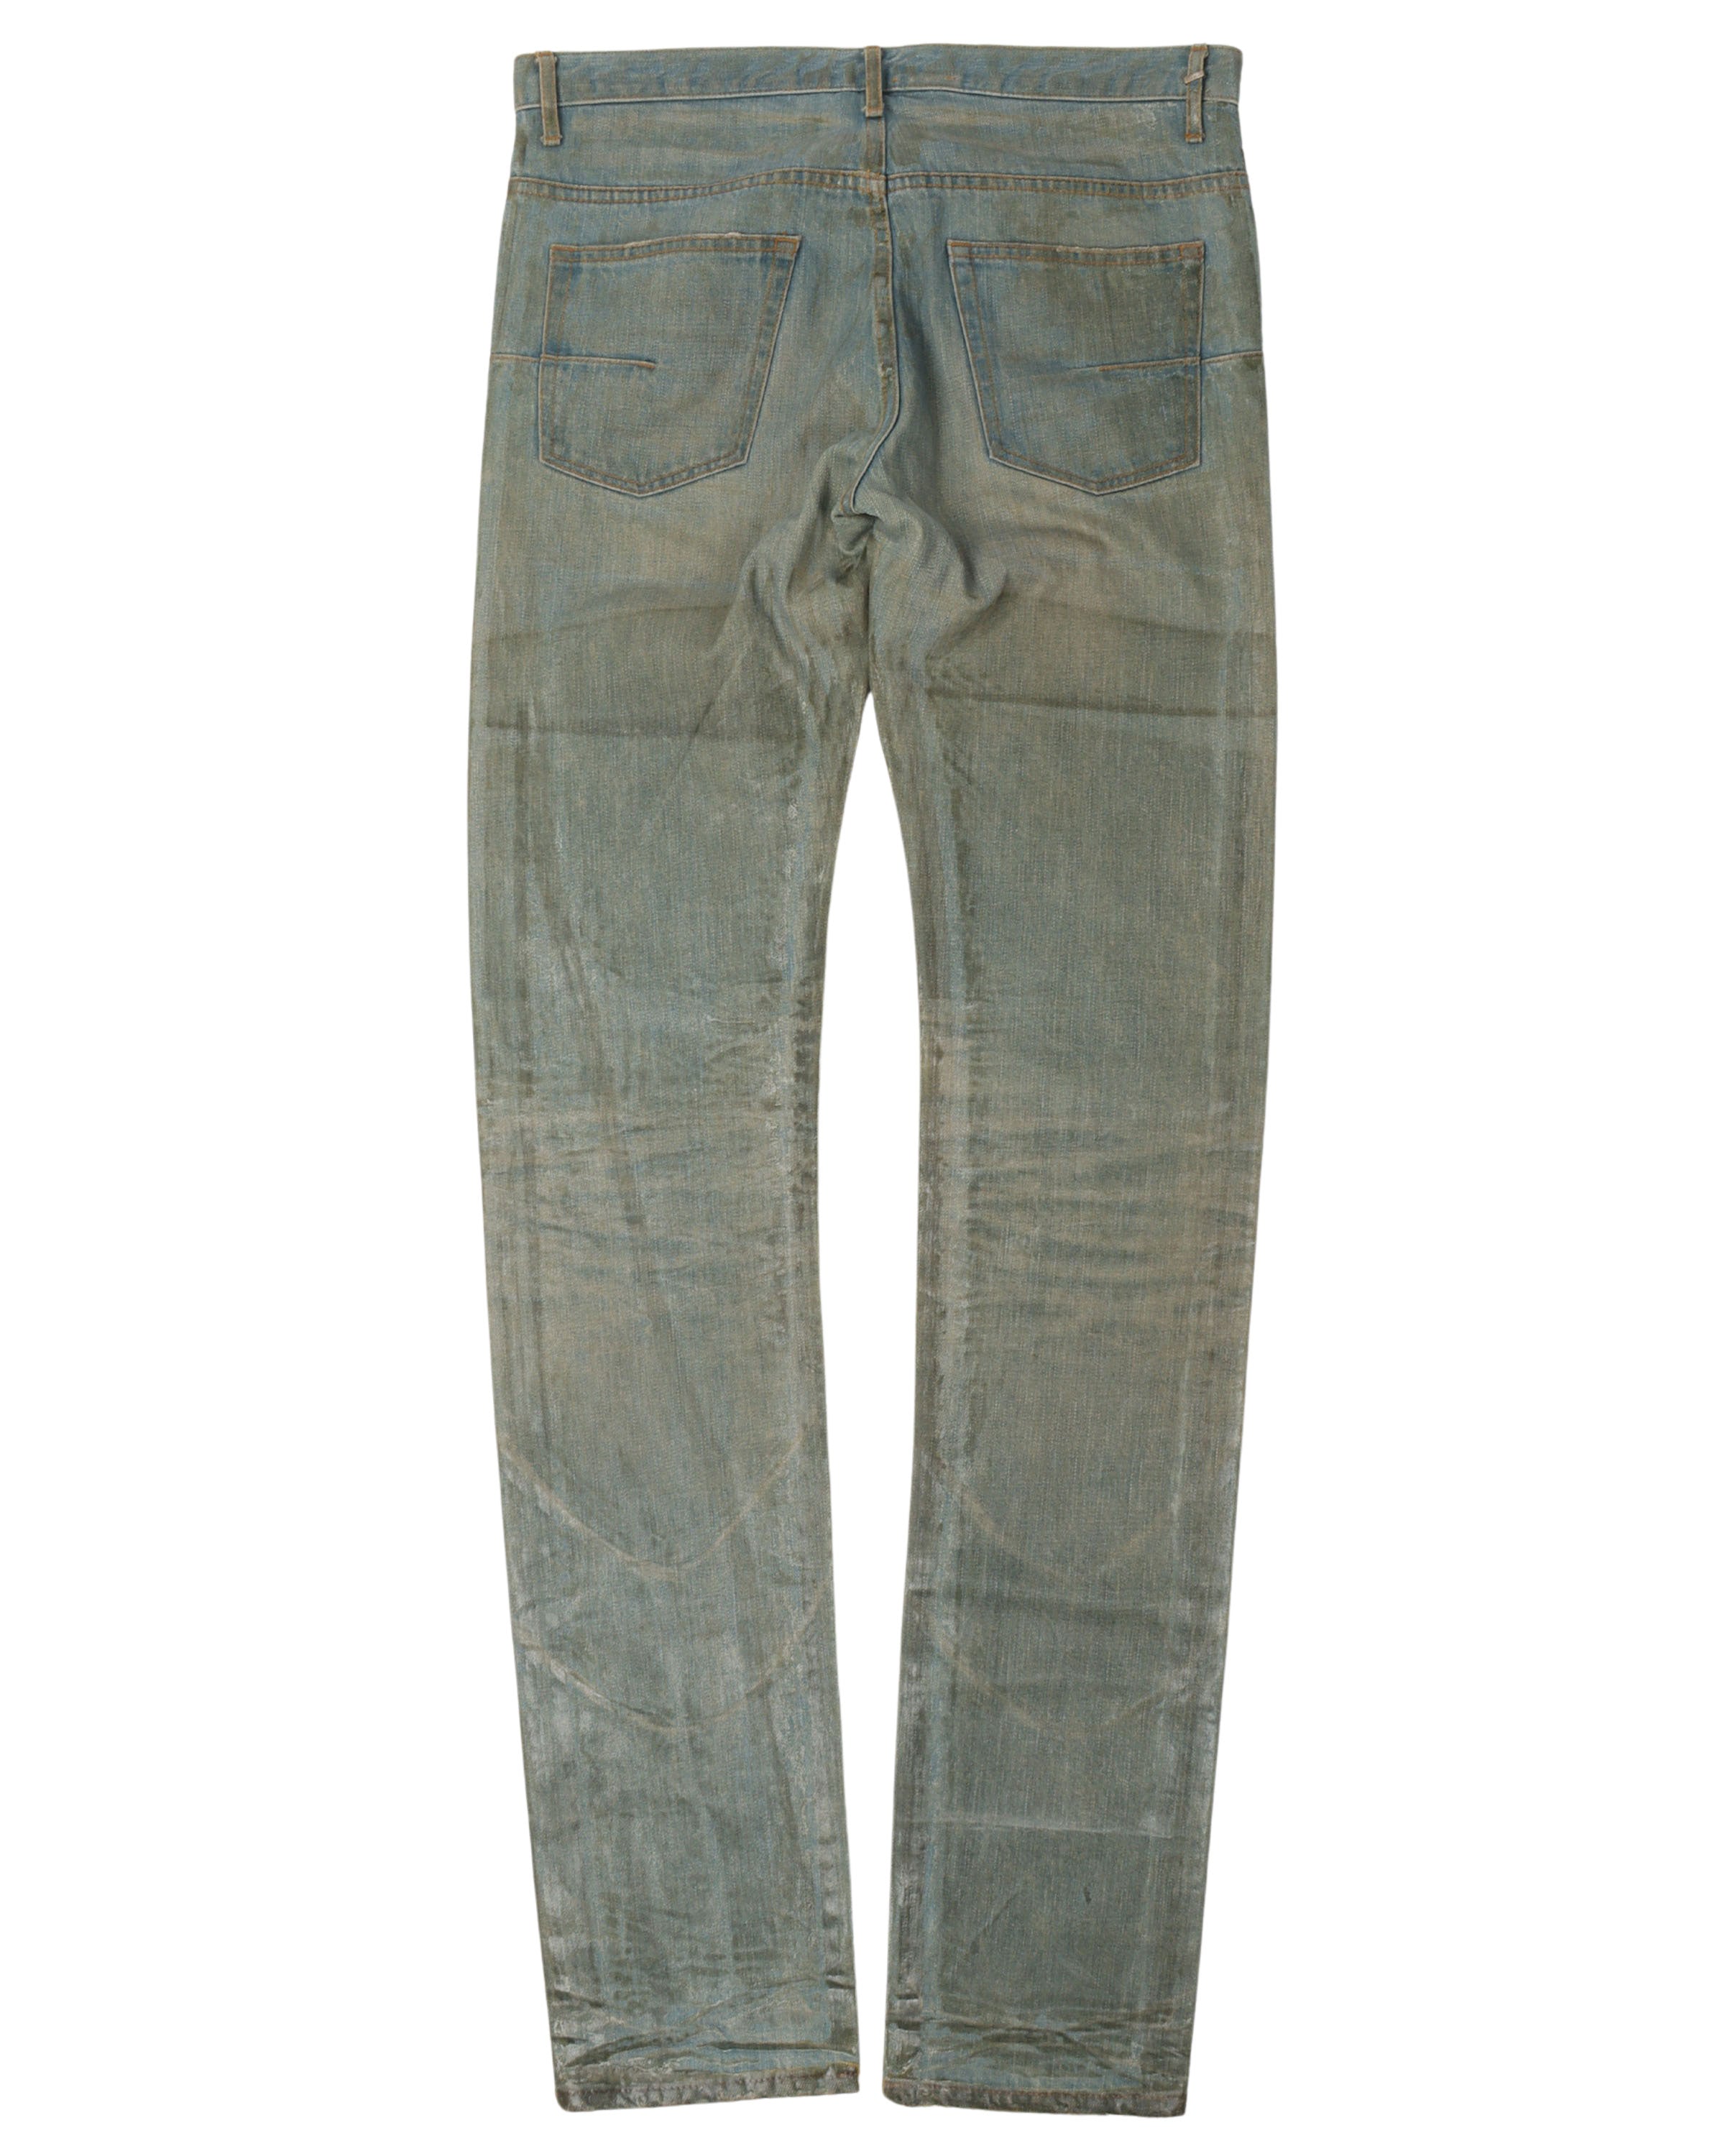 SS04 Light Wash Waxed Skinny Jeans